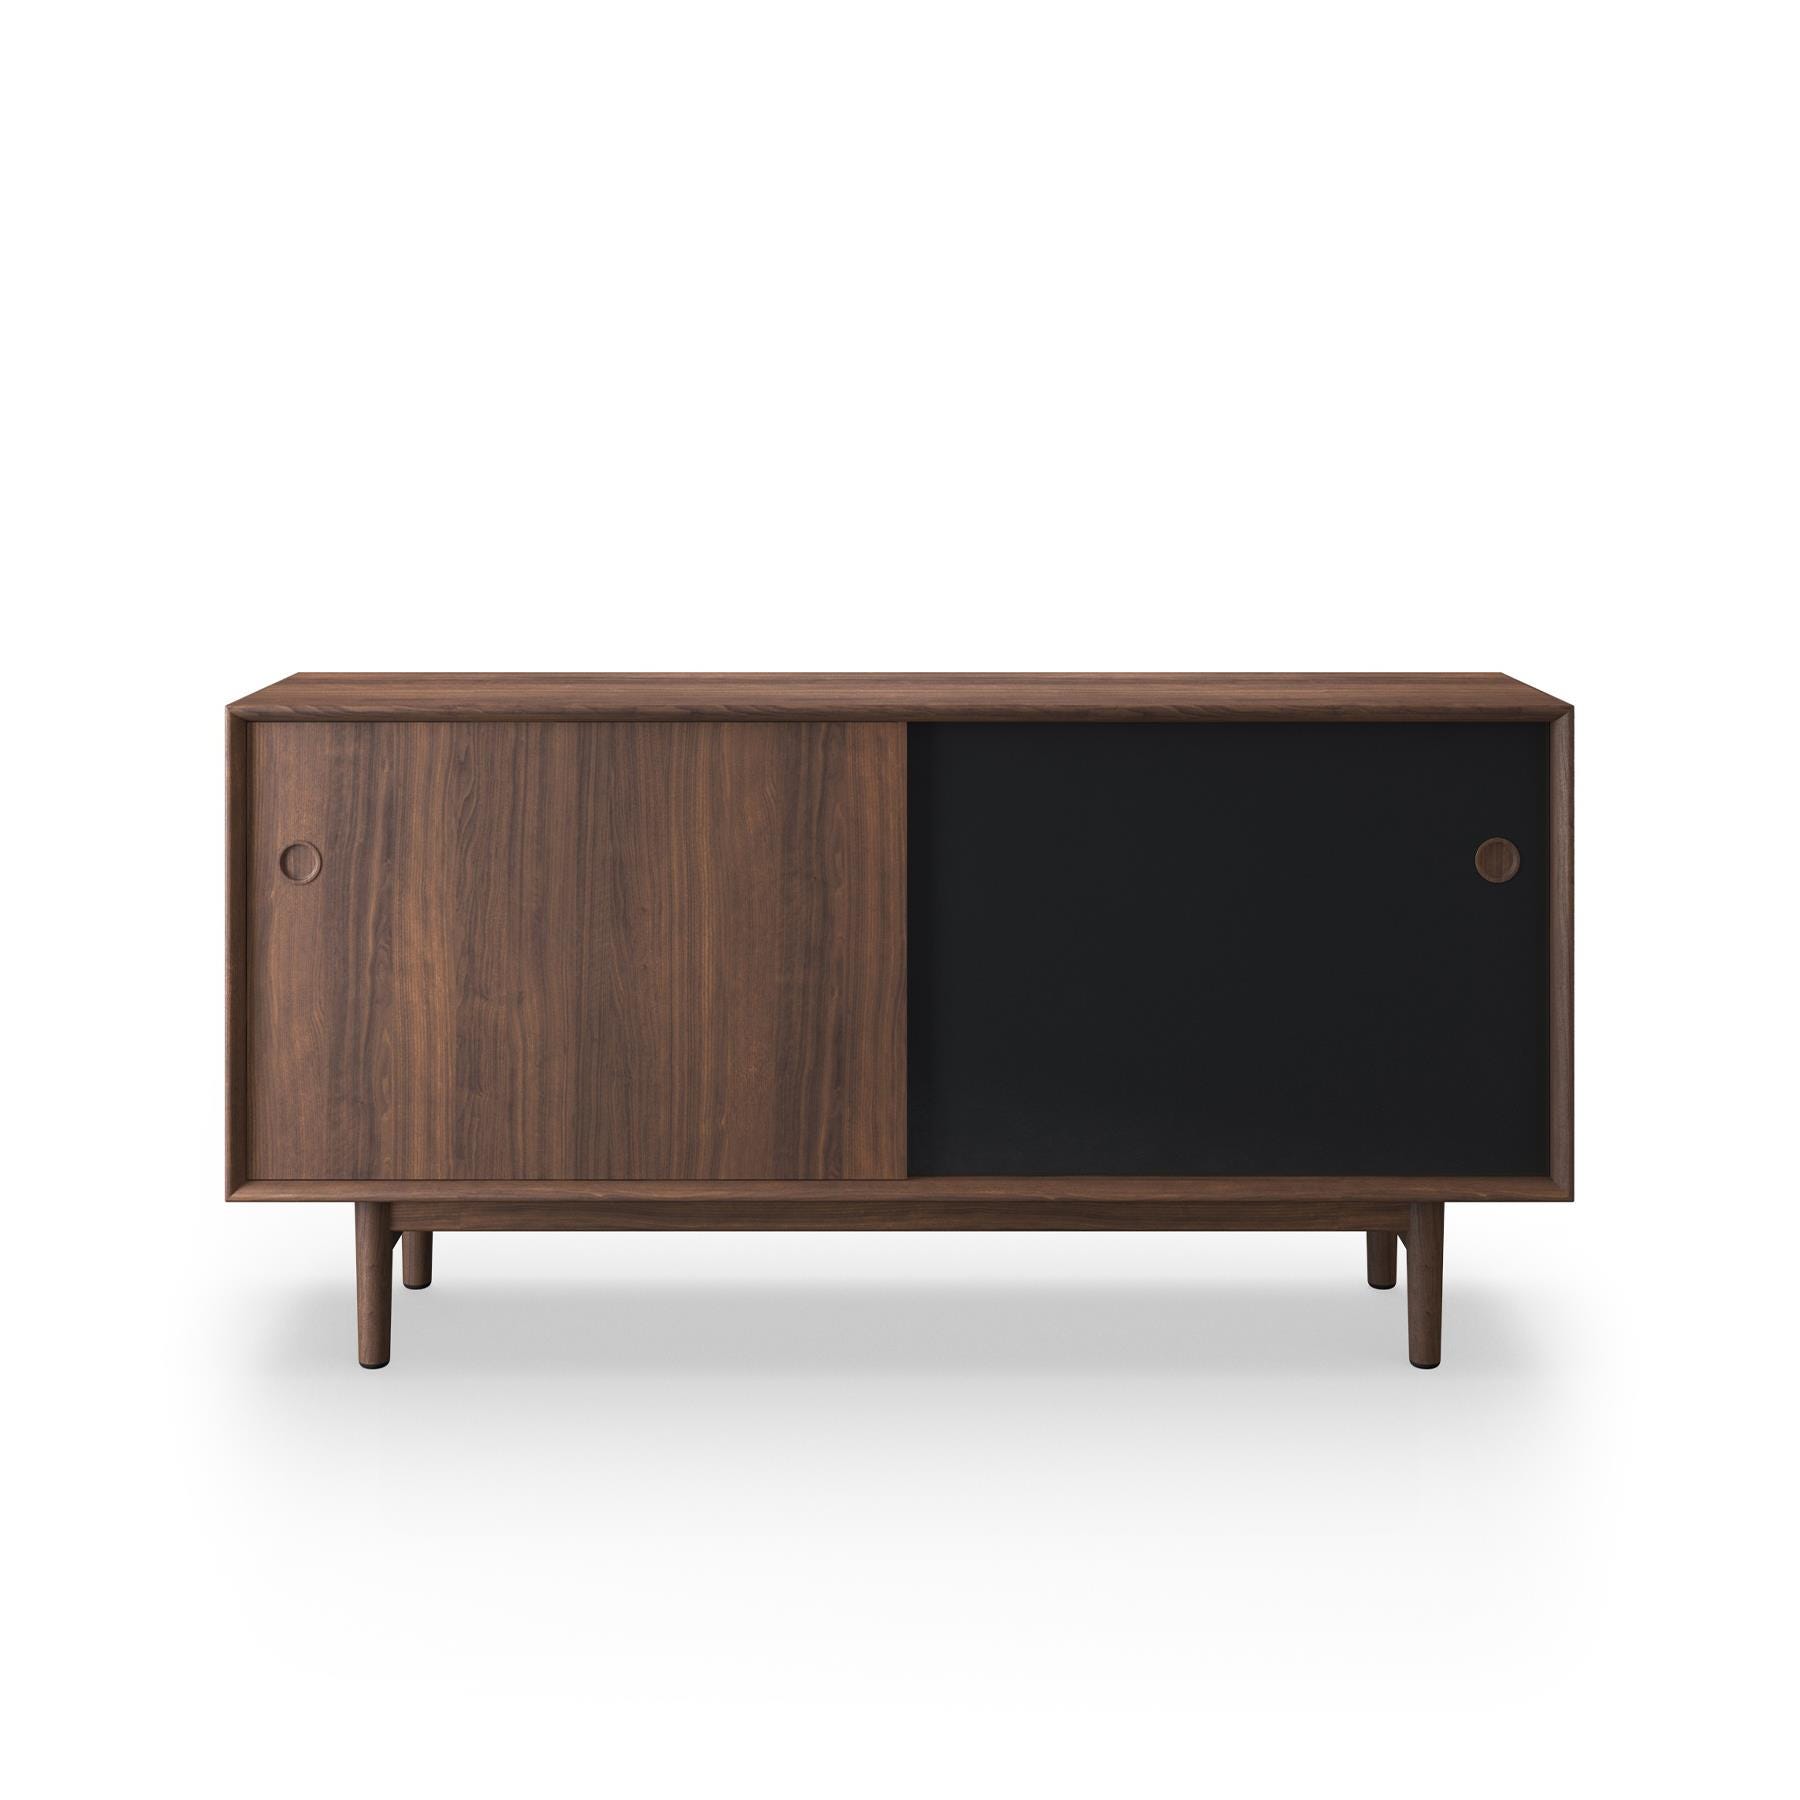 Sibast No 11 Sideboard Walnut Black And Natural Front Wooden Legs Dark Wood Designer Furniture From Holloways Of Ludlow